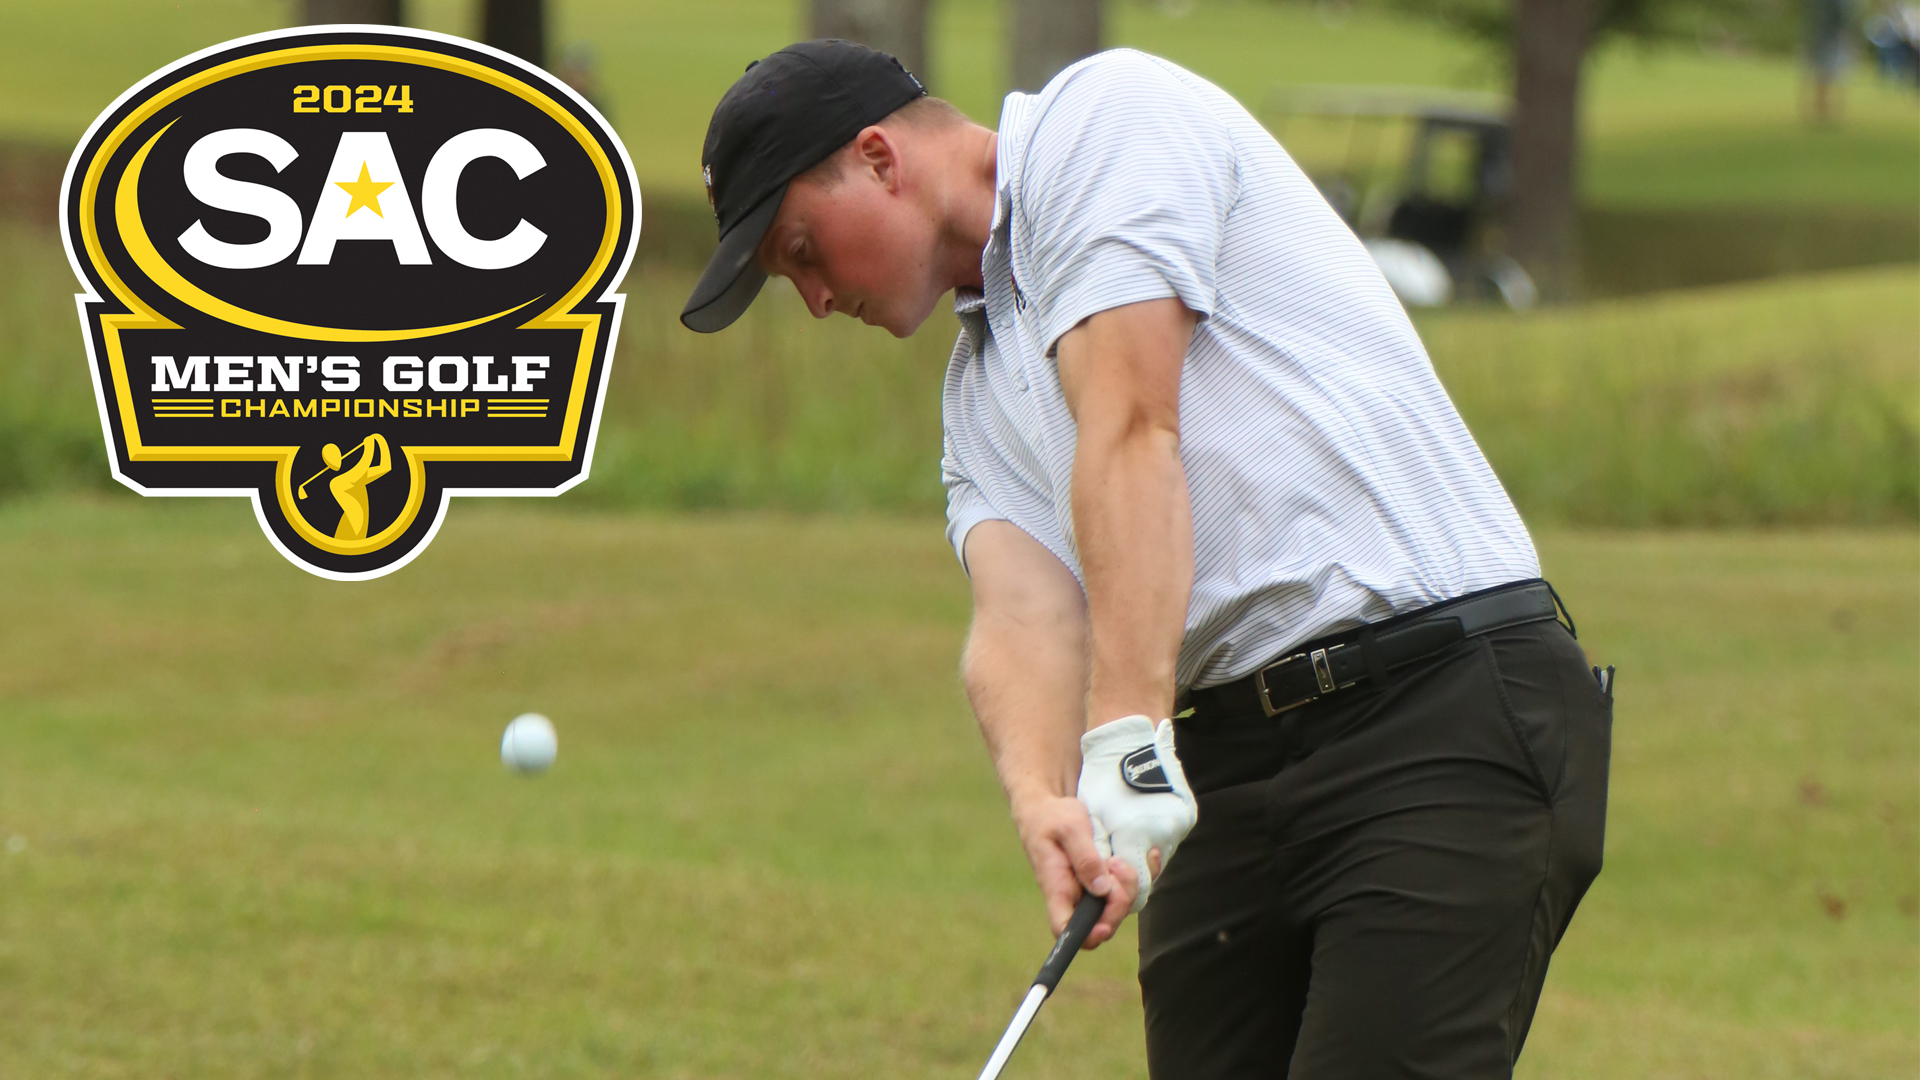 Pioneers set to compete at SAC Men's Golf Championship